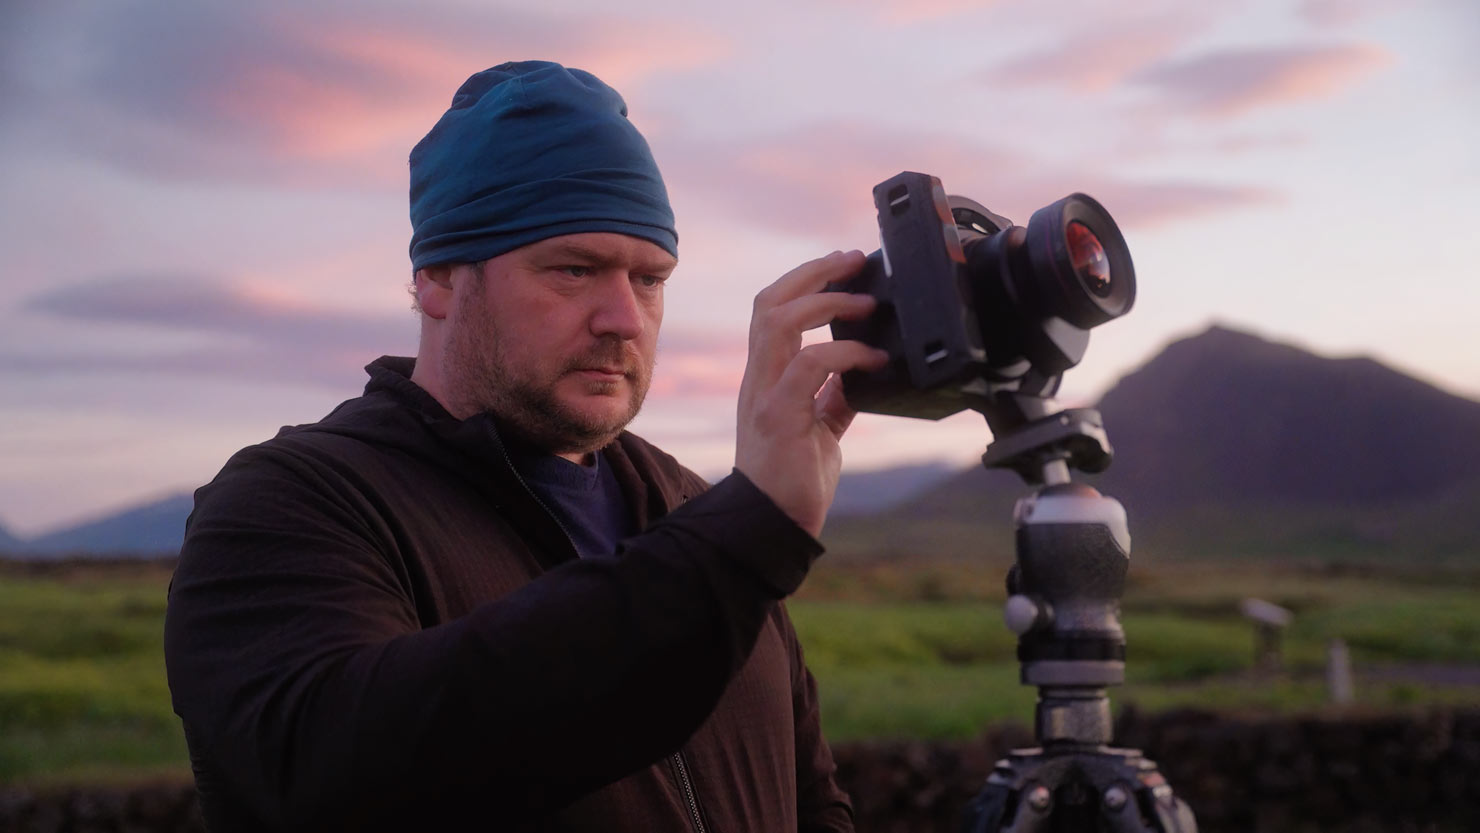 Video Film Still Change Settings Camera Field Pink Sky Paul Reiffer Capture One iPad Iceland Midnight Sun Shoot Behind The Scenes BTS Filming Phase One